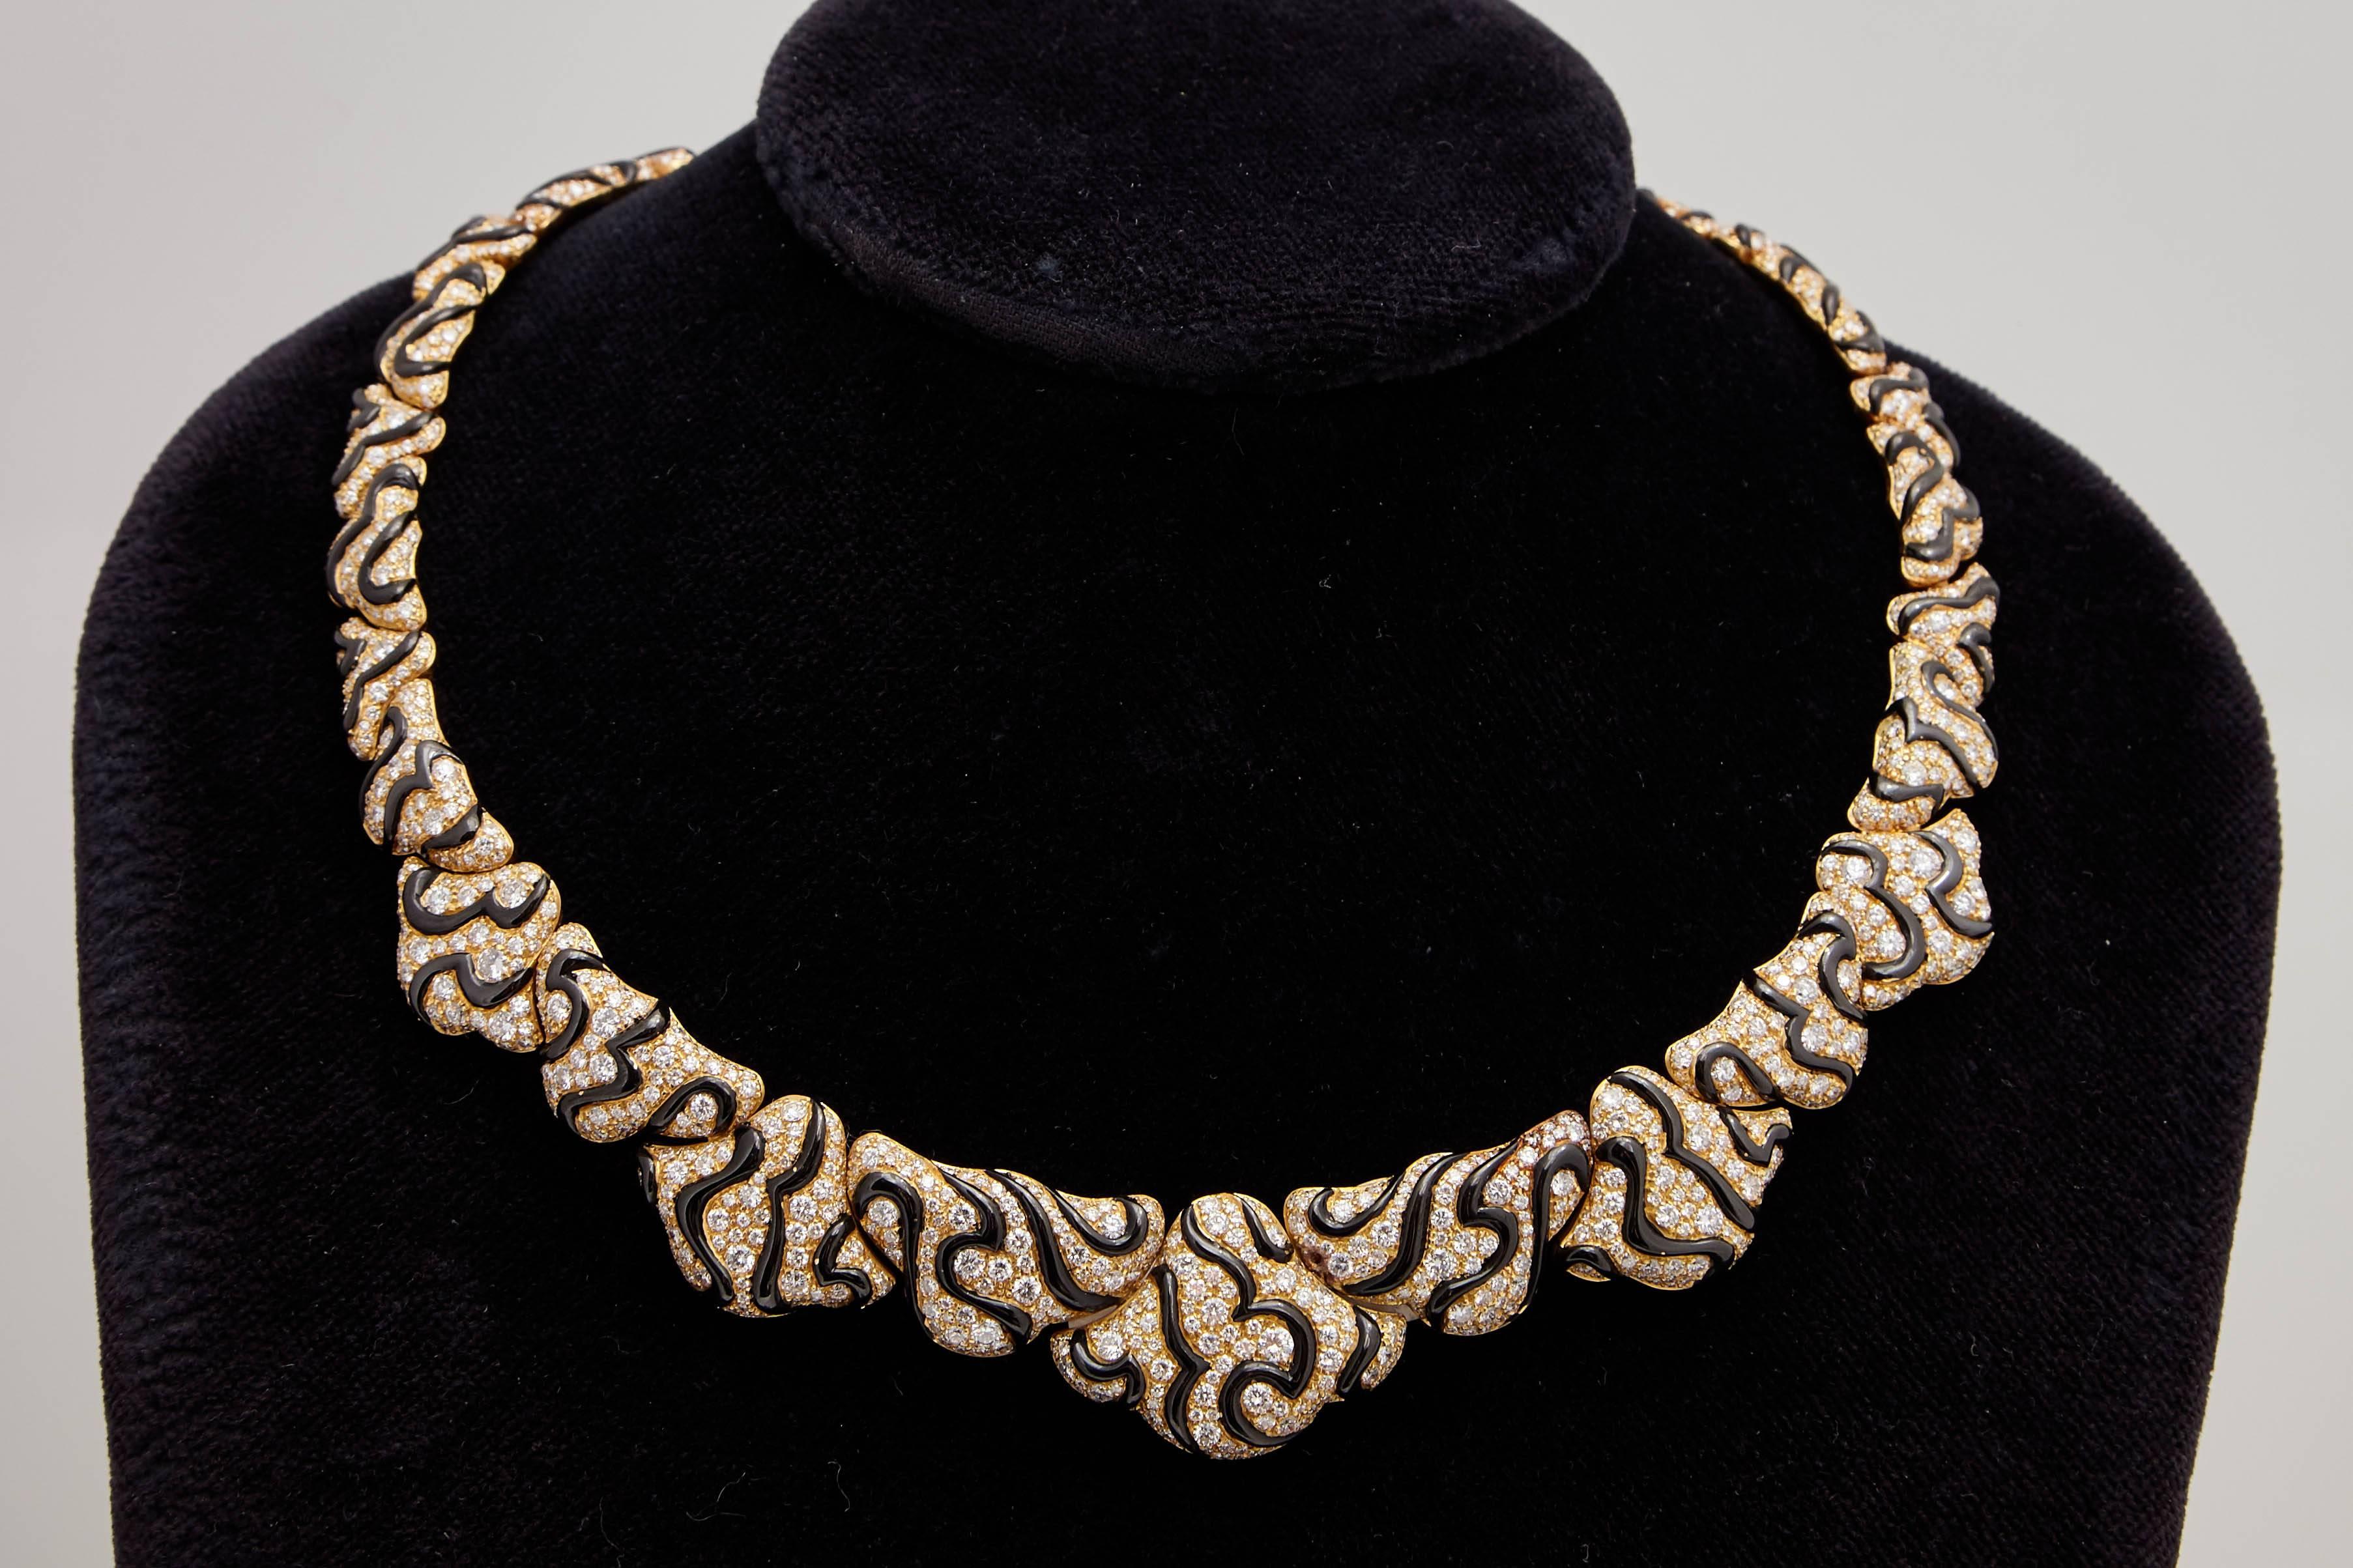 Round Cut Marina B Rare Gold Necklace For Sale